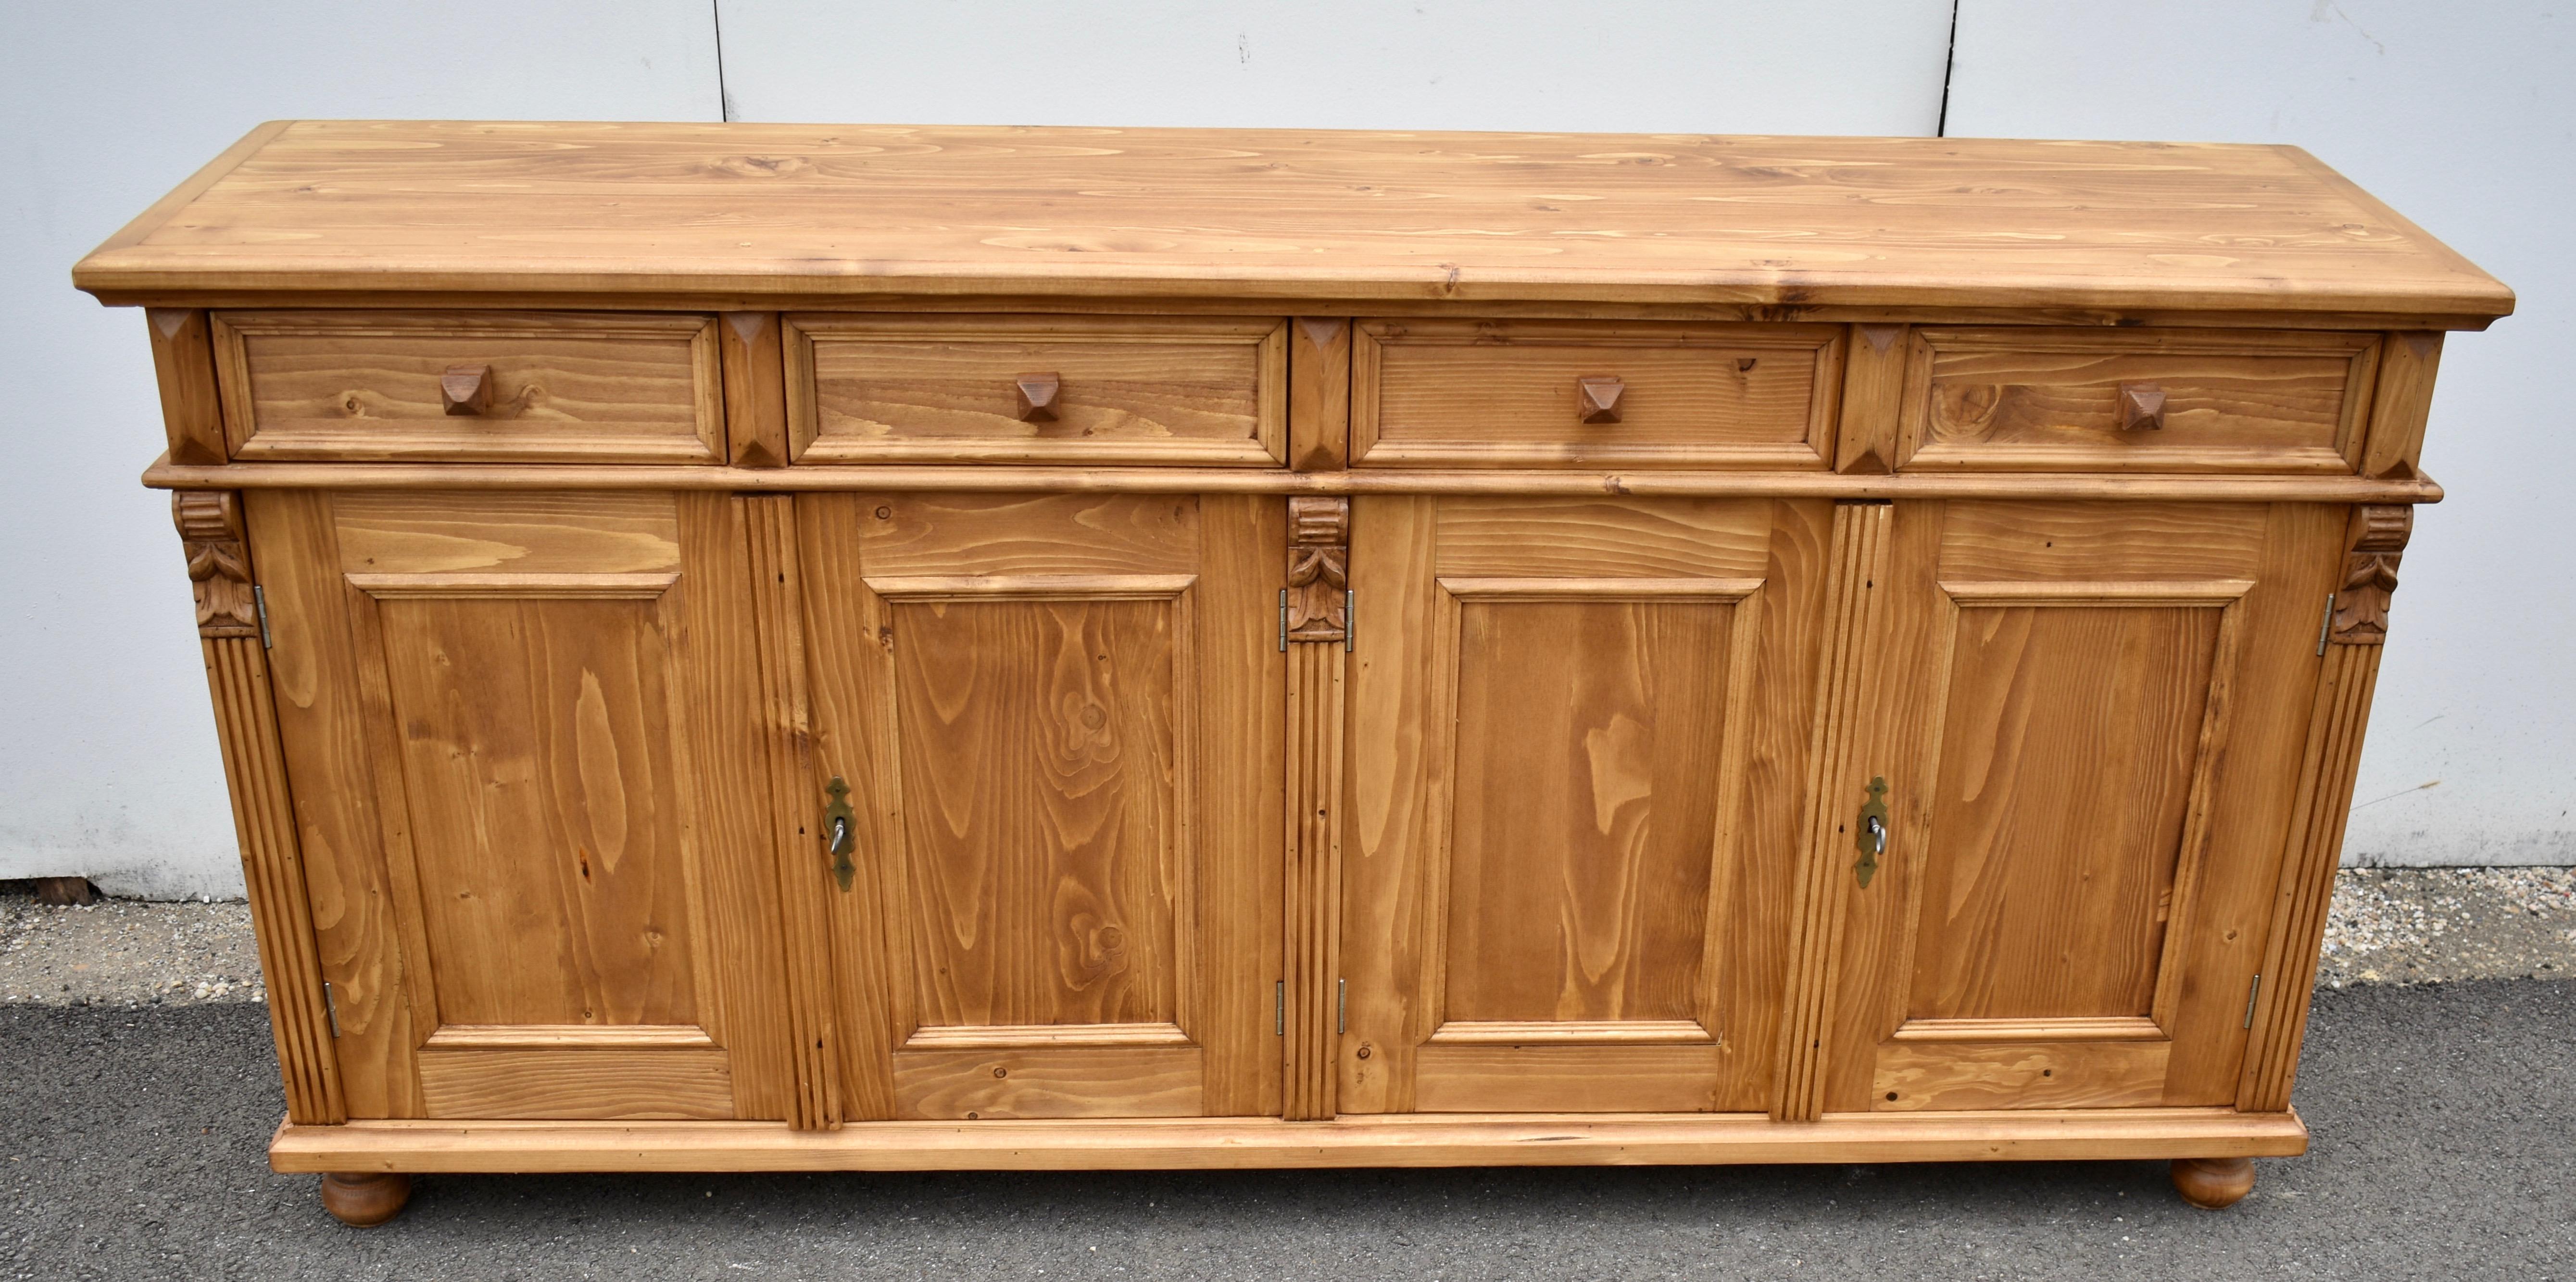 Antique pine sideboards can be hard to find so our workshop in Europe takes good quality European yellow pine to build this piece using traditional design features and construction techniques.  In this case the sideboard base is hand-polished with